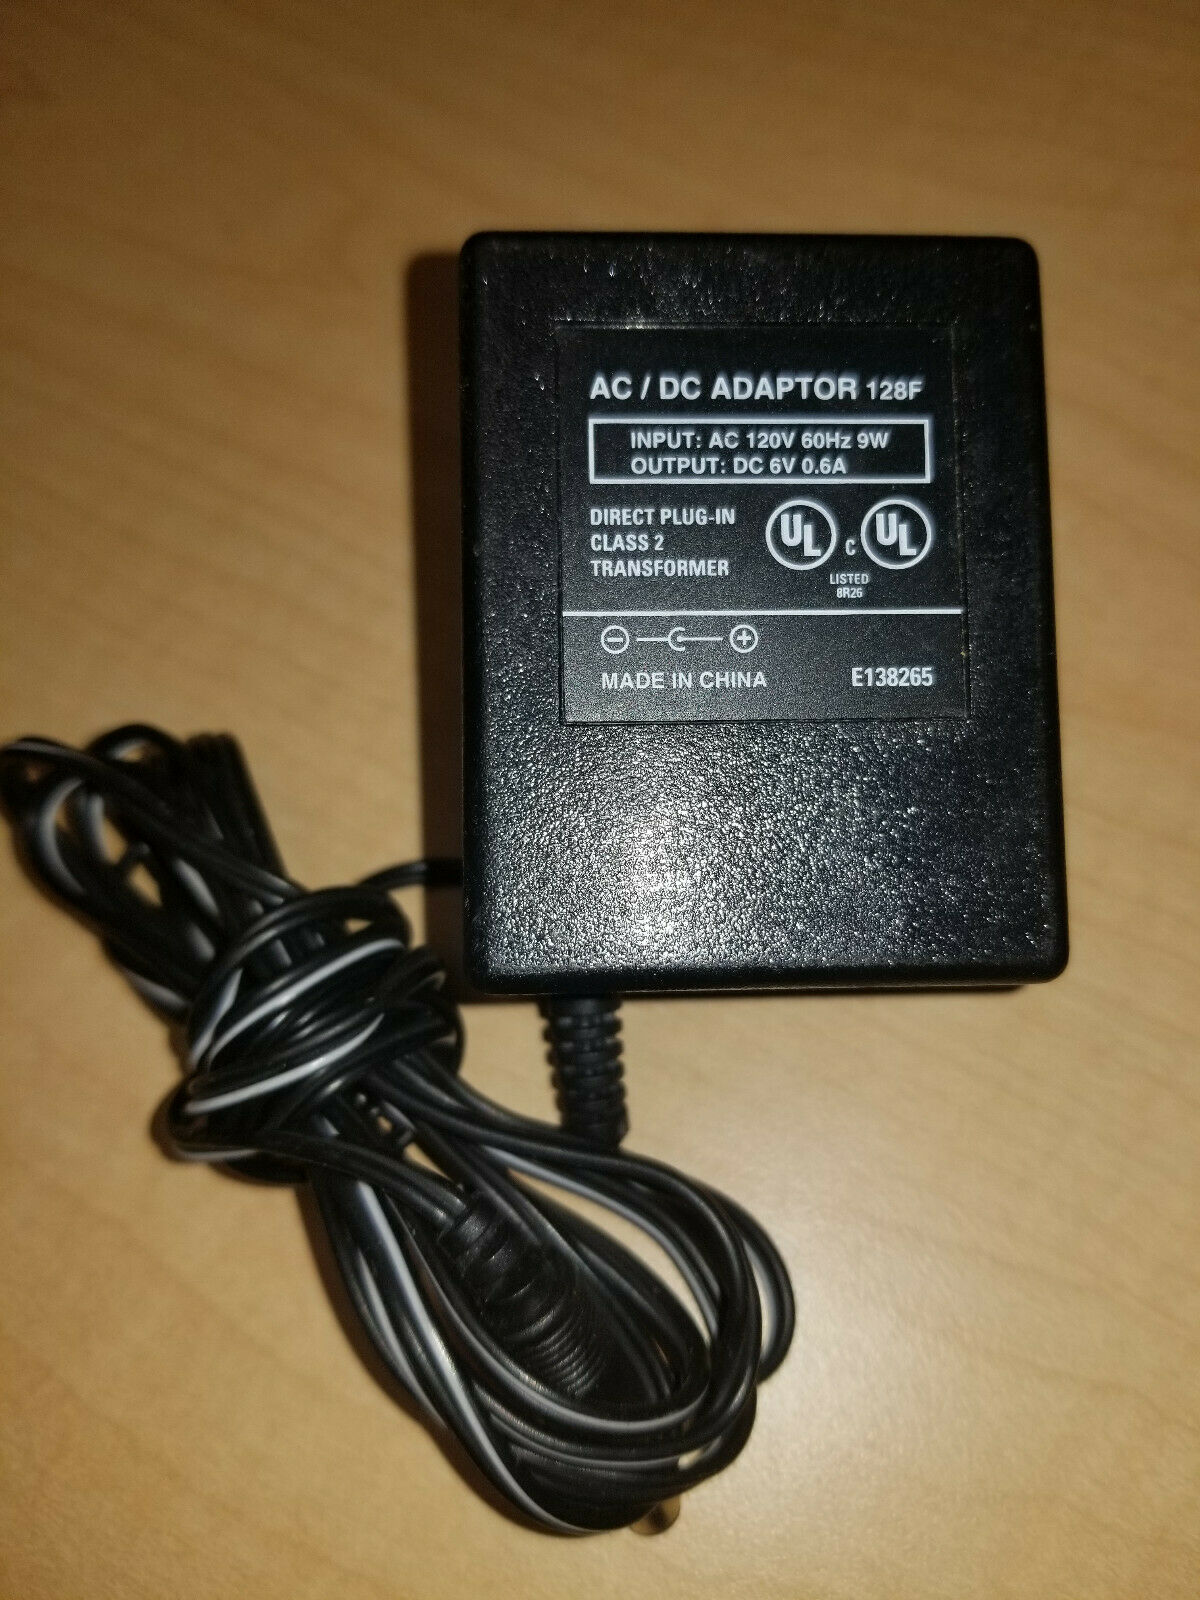 (91NK3651) 9V AC / DC Adapter Power Supply Charger (E138265) Country/Region of Manufacture: China Model: 91NK3651 Type: